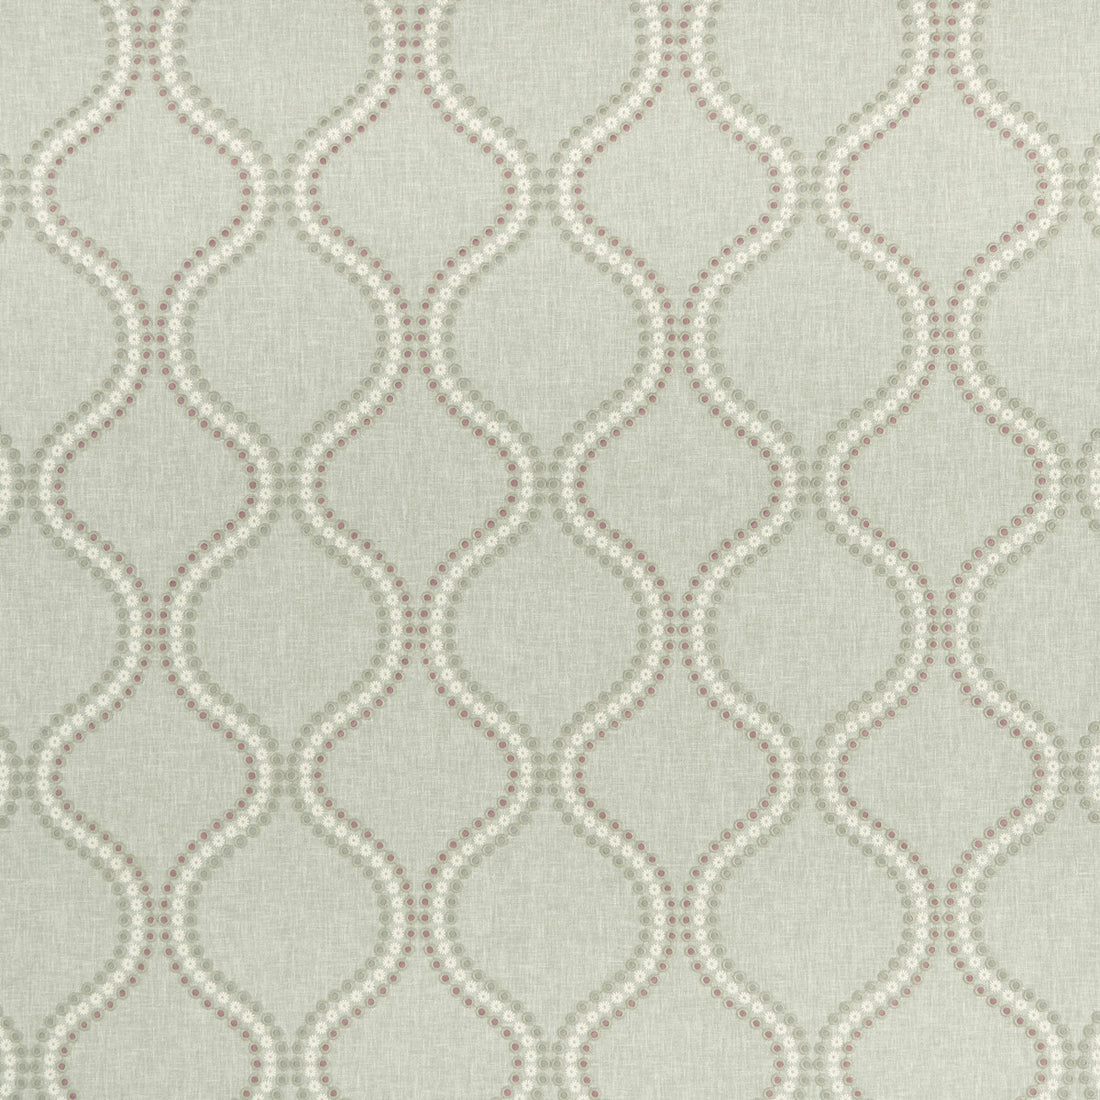 Layton fabric in heather color - pattern F1006/04.CAC.0 - by Clarke And Clarke in the Clarke &amp; Clarke Halcyon collection